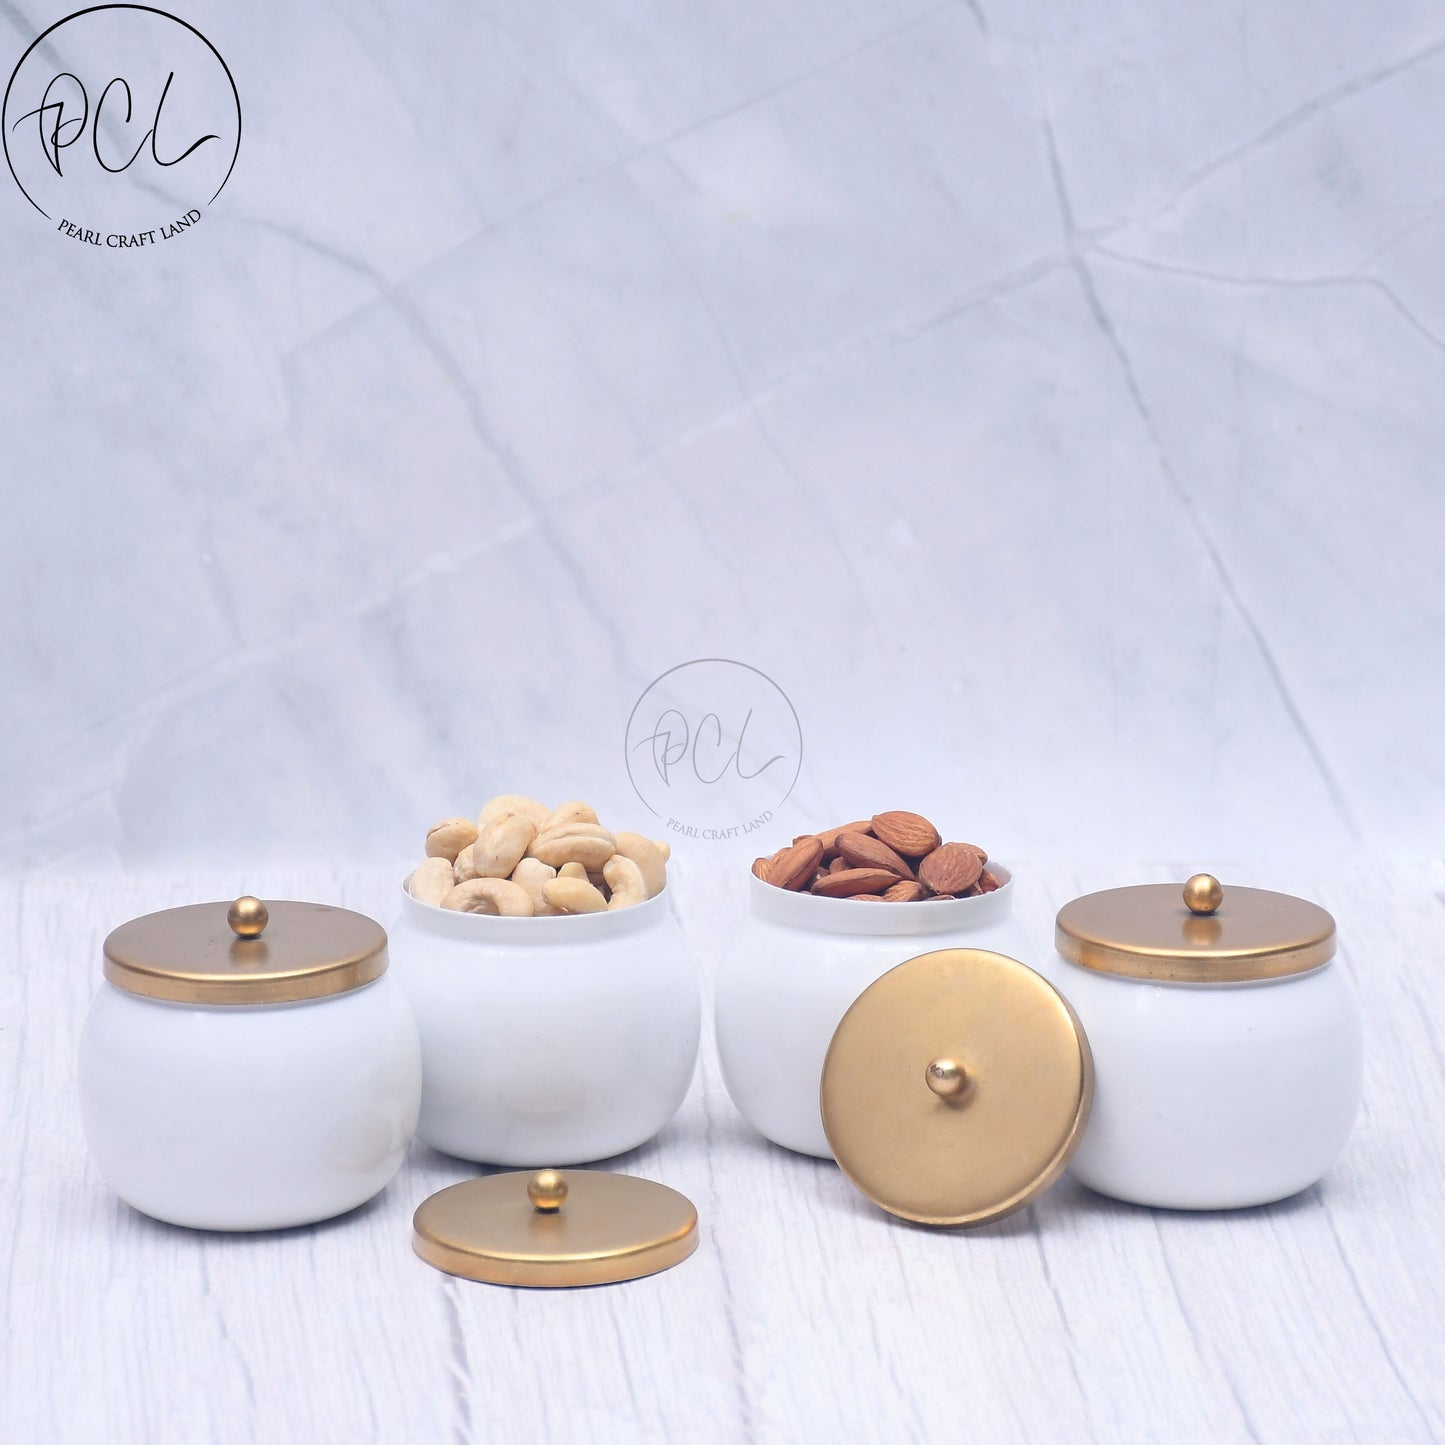 Exclusive Dryfruits Jar Containers for Home & Kitchen Storage Box Set of 4 with Royal Gifting Box